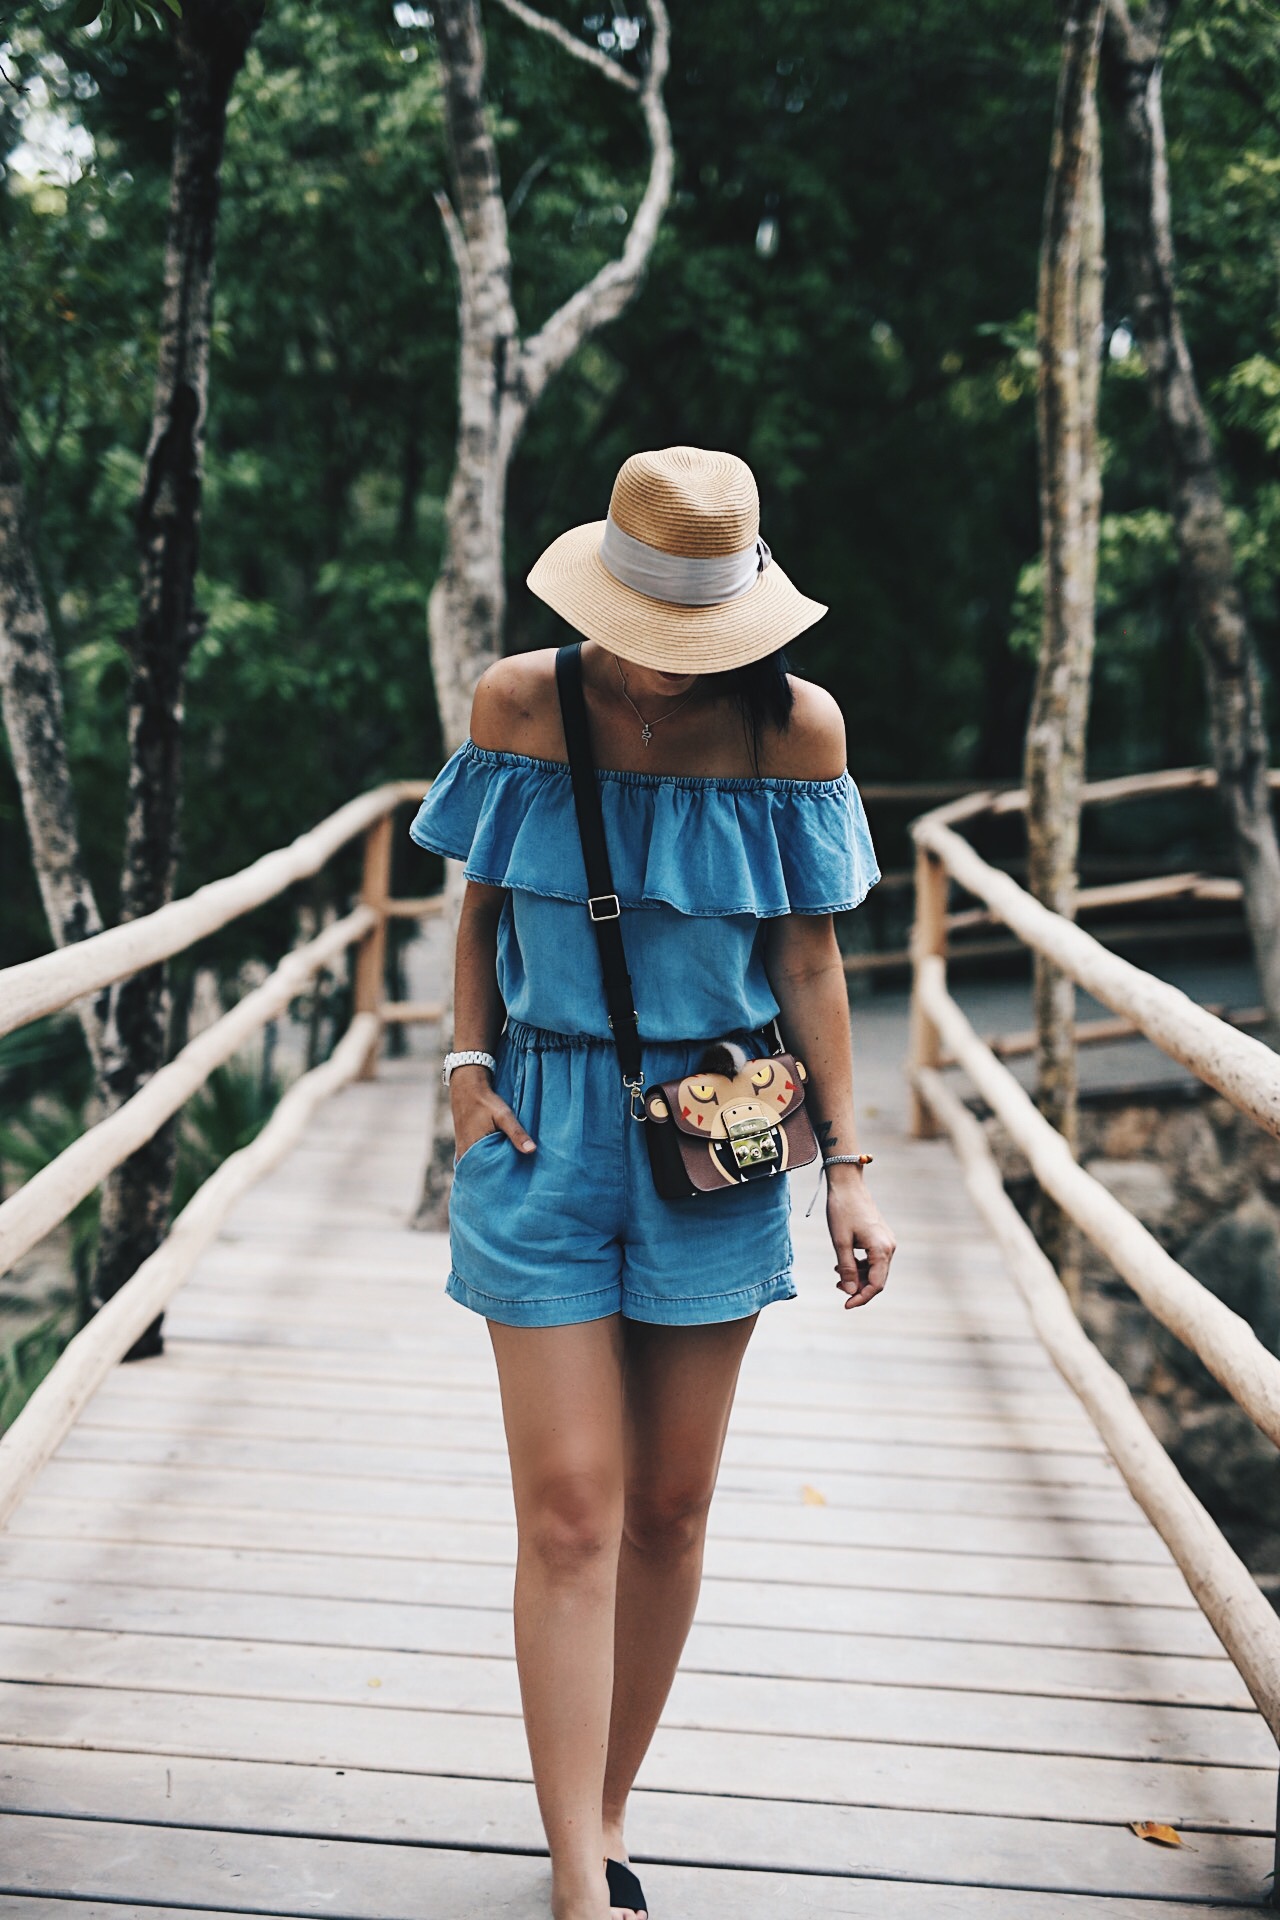 DTKAustin shares details on the most versatile Splendid chambray romper and how to wear it dressy for date night and casual on the beach. Click for more photos and details. | how to style a romper | how to wear a romper | romper style tips | summer fashion tips | summer outfit ideas | summer style tips | what to wear for summer | warm weather fashion | fashion for summer | style tips for summer | outfit ideas for summer || Dressed to Kill